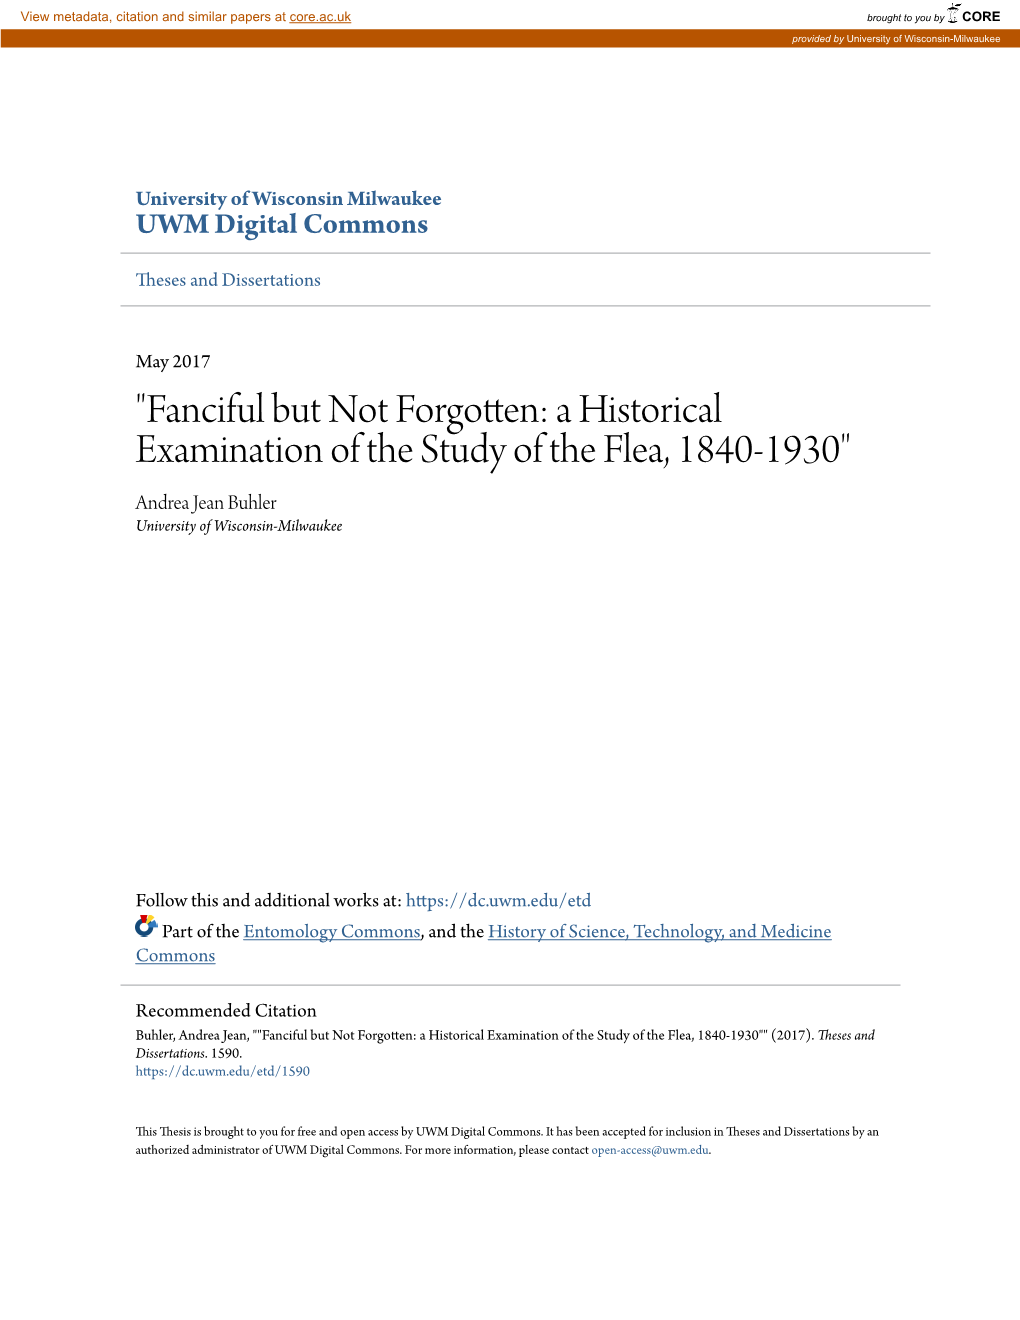 "Fanciful but Not Forgotten: a Historical Examination of the Study of the Flea, 1840-1930" Andrea Jean Buhler University of Wisconsin-Milwaukee